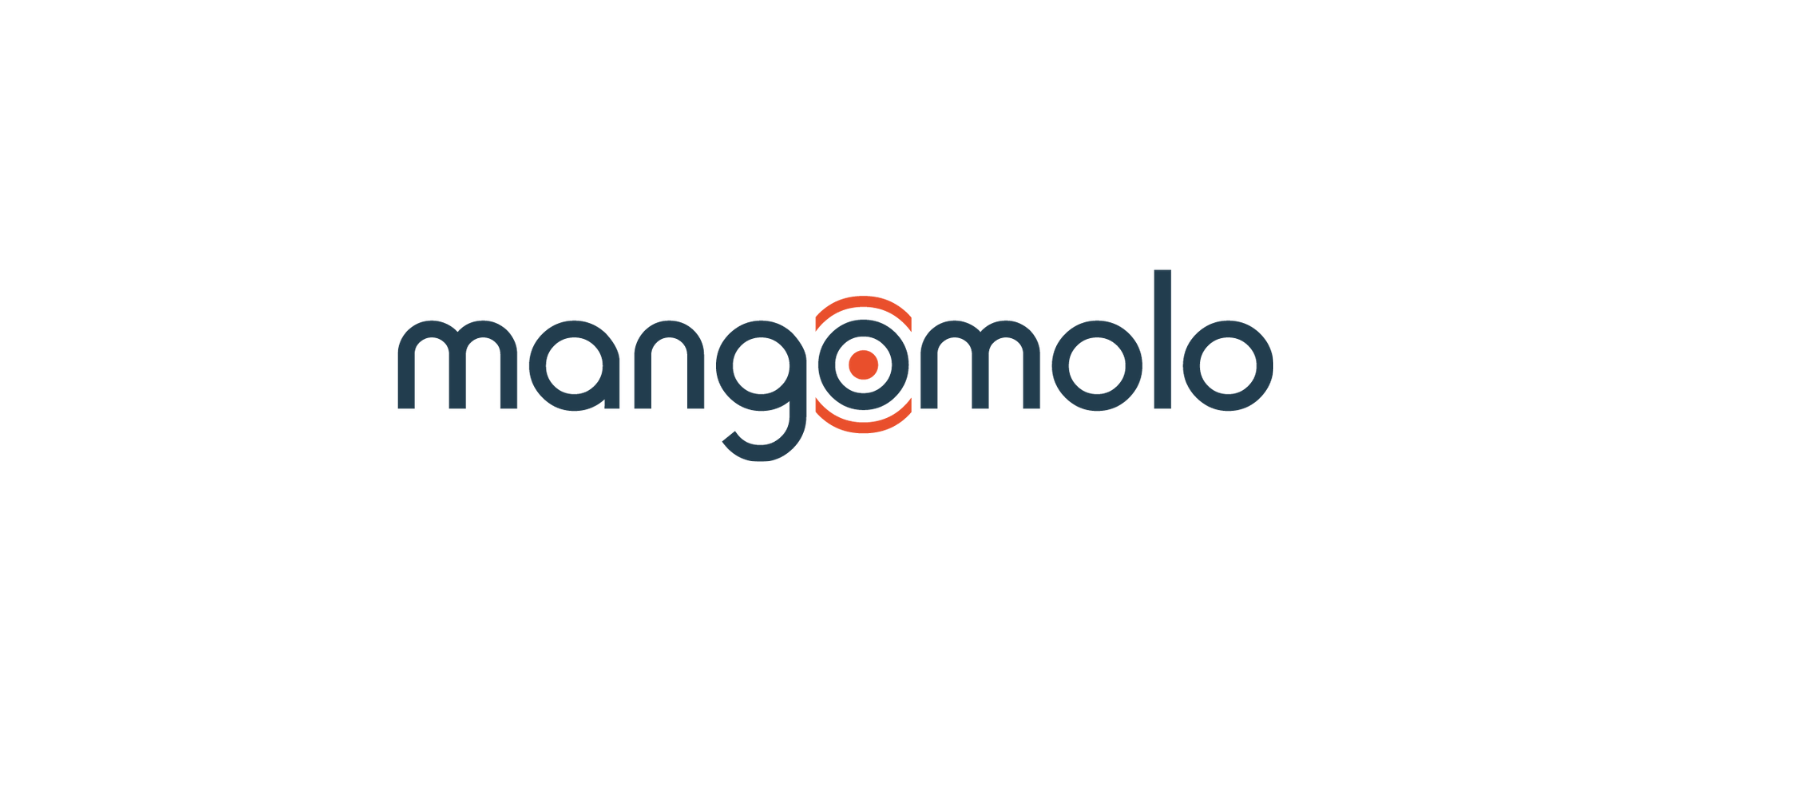 South African Broadcasting partners with Mangomolo to expand online video capabilities